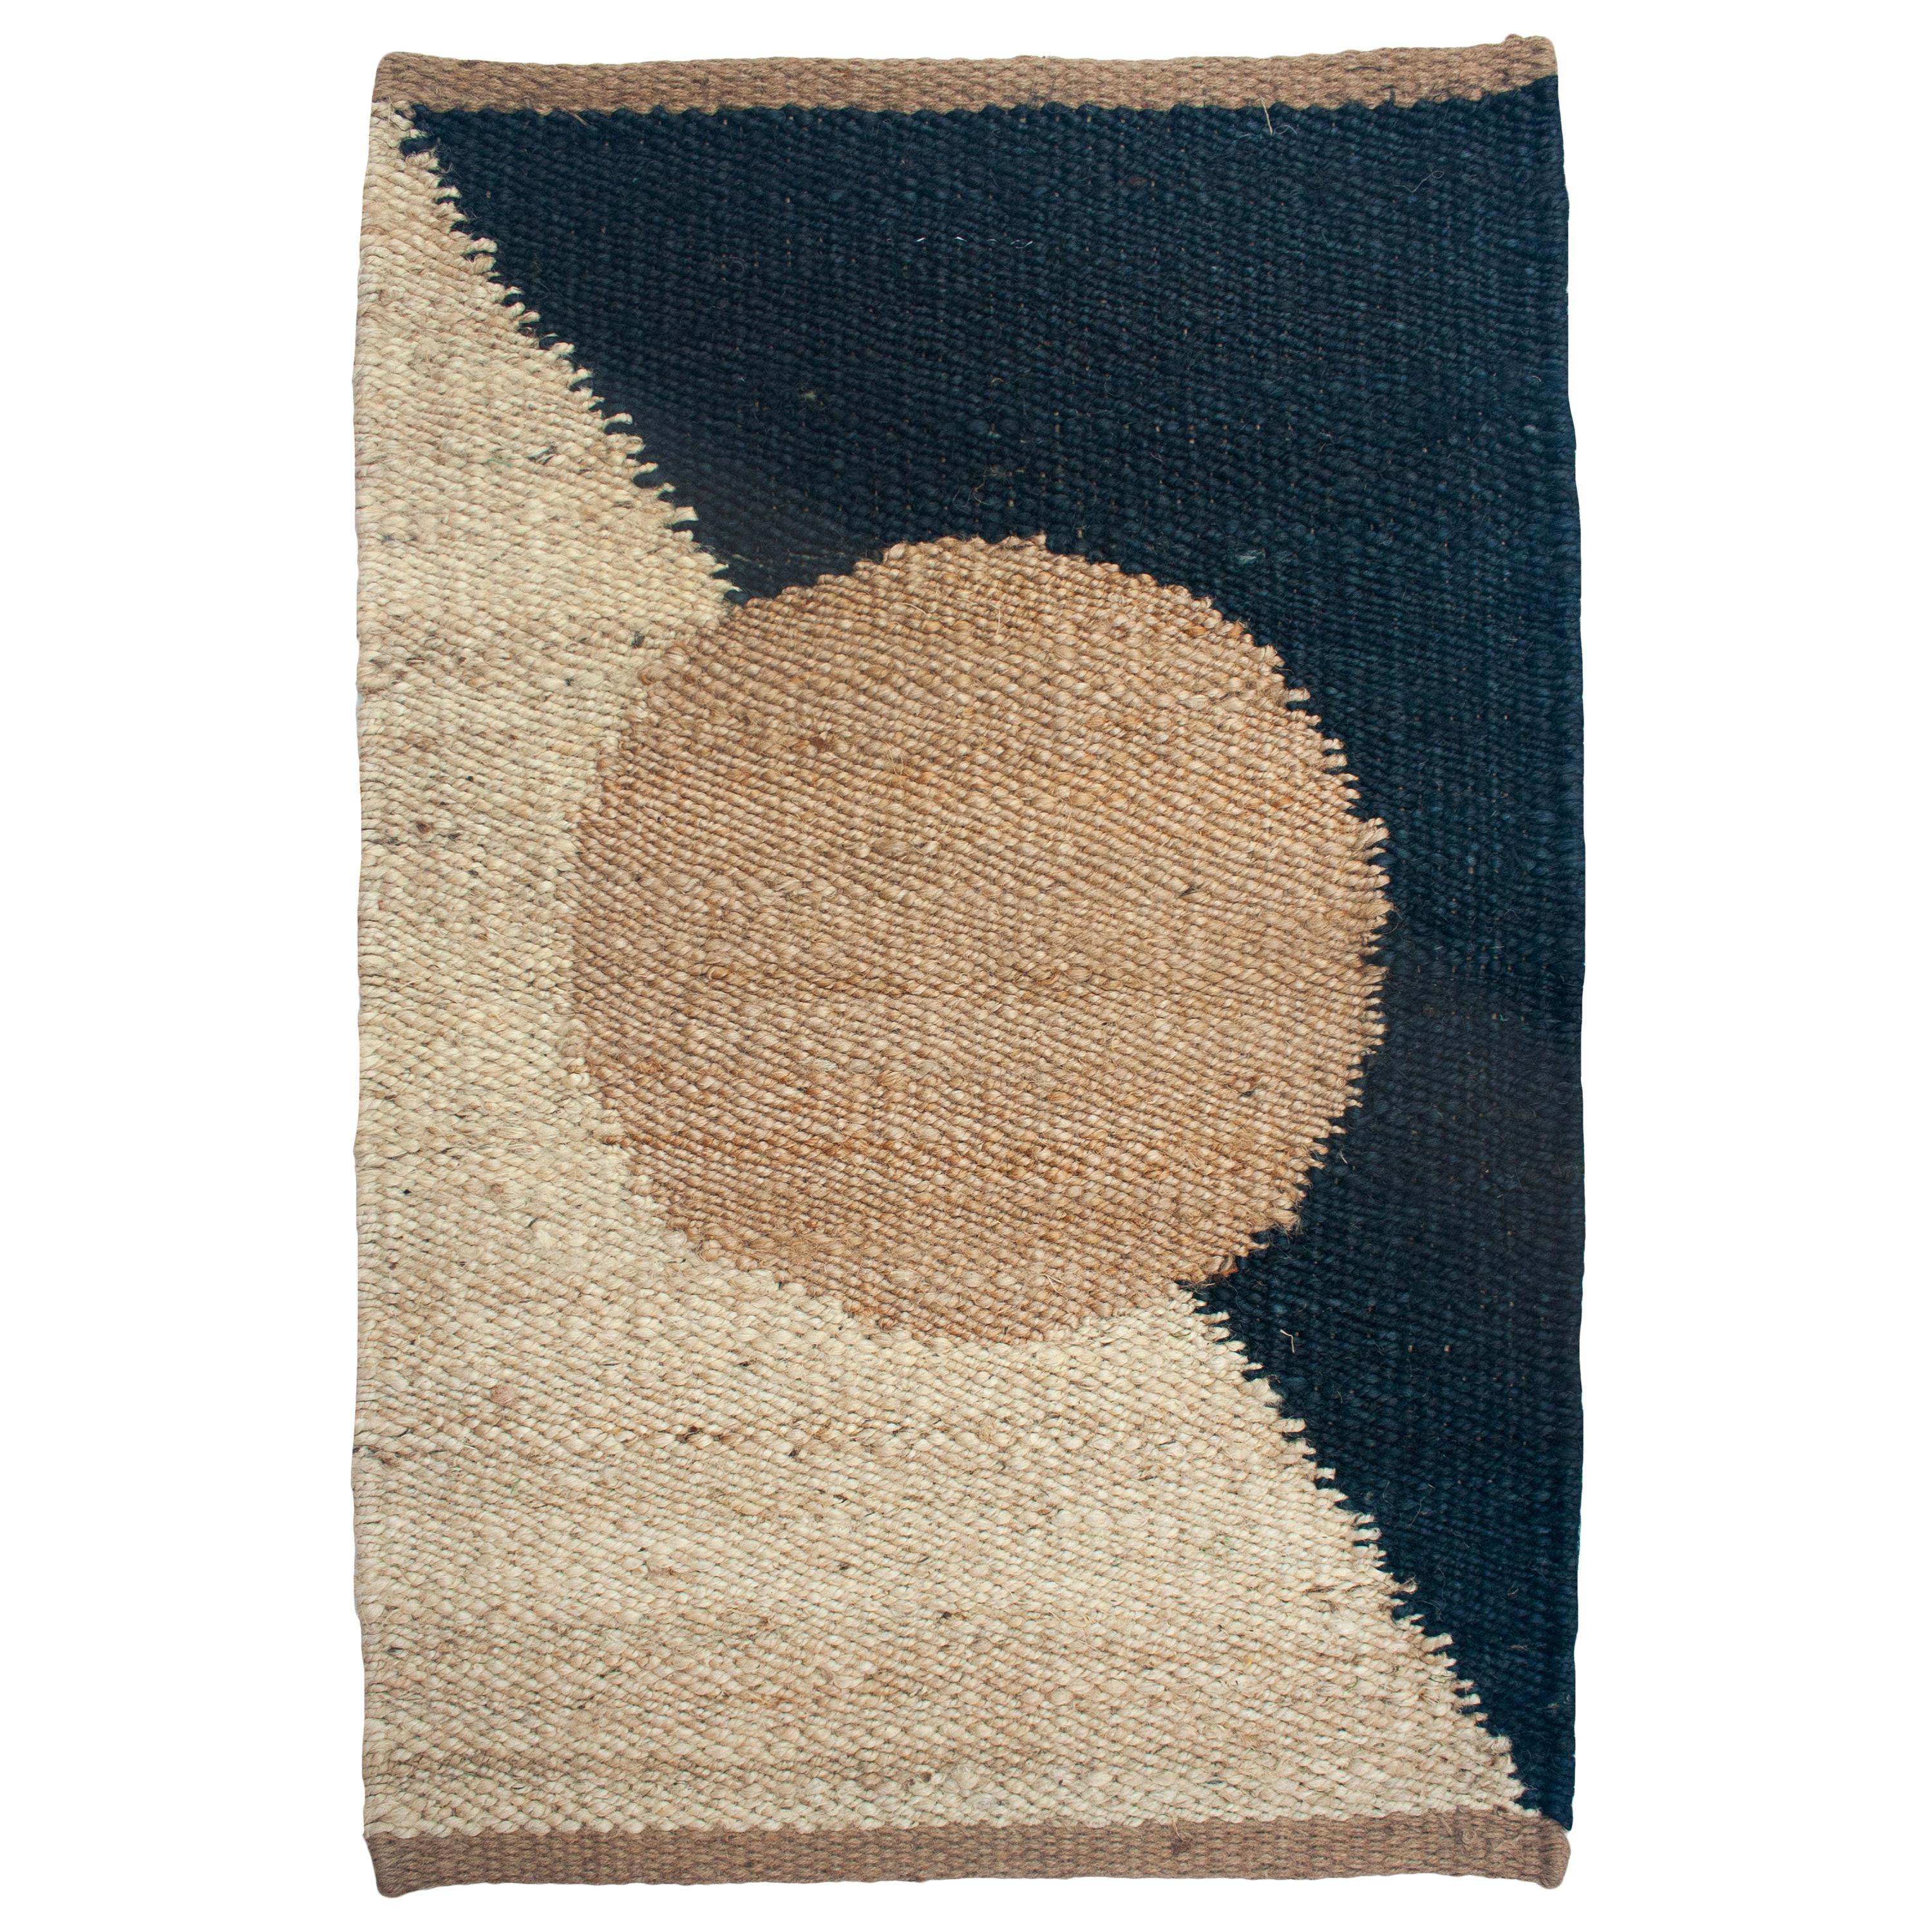 Margeaux Circle Geometric Handwoven Modern Jute Rug, Carpet and Durrie